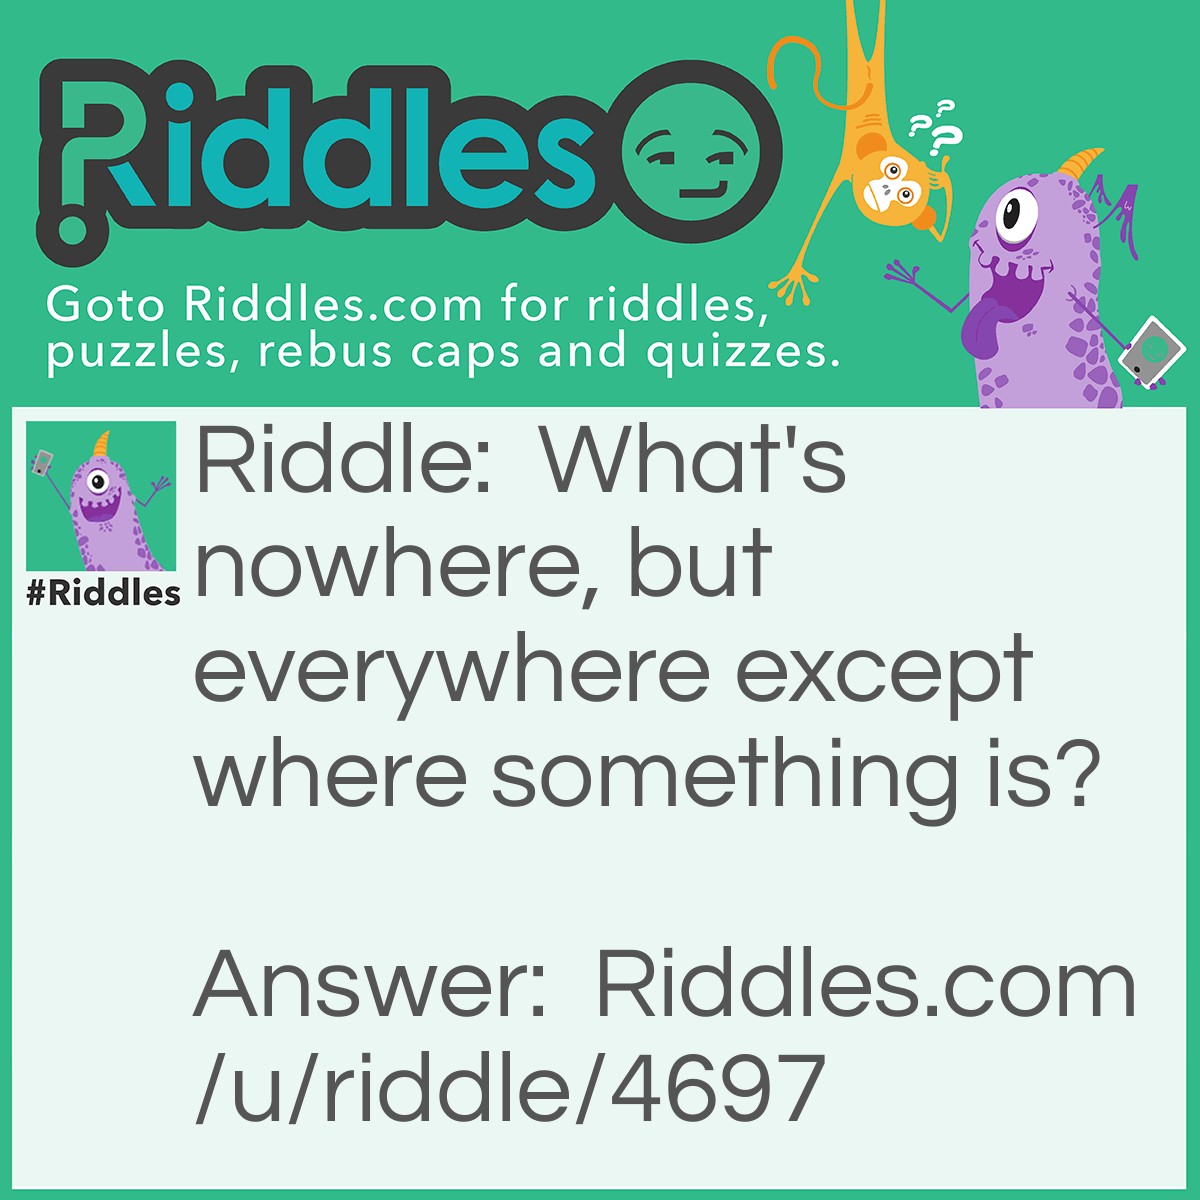 Riddle: What's nowhere, but everywhere except where something is? Answer: Nothing.